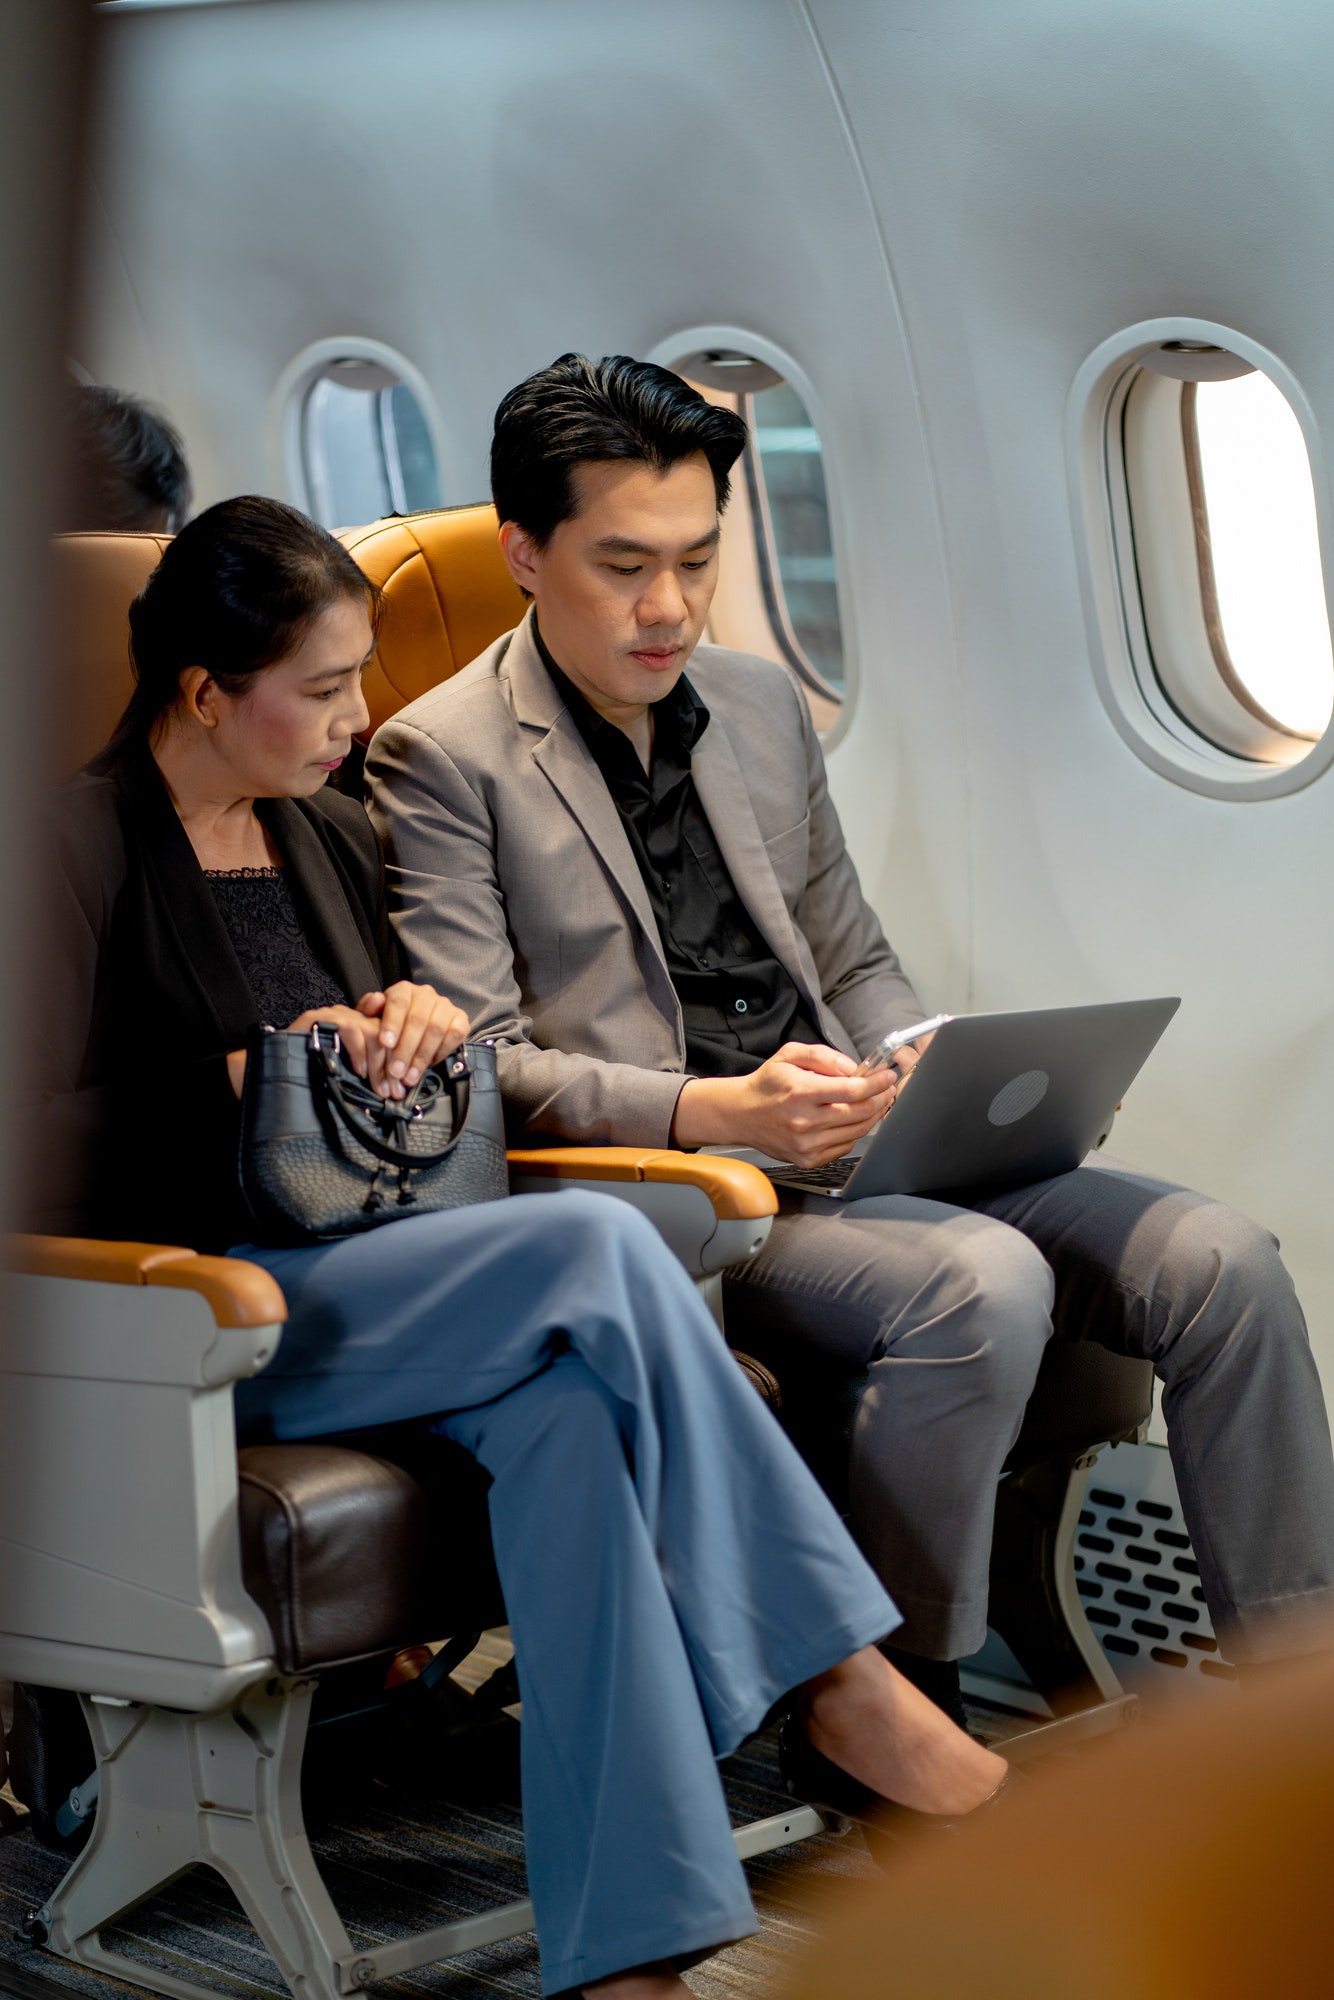 Two people sat on a plane working on a laptop